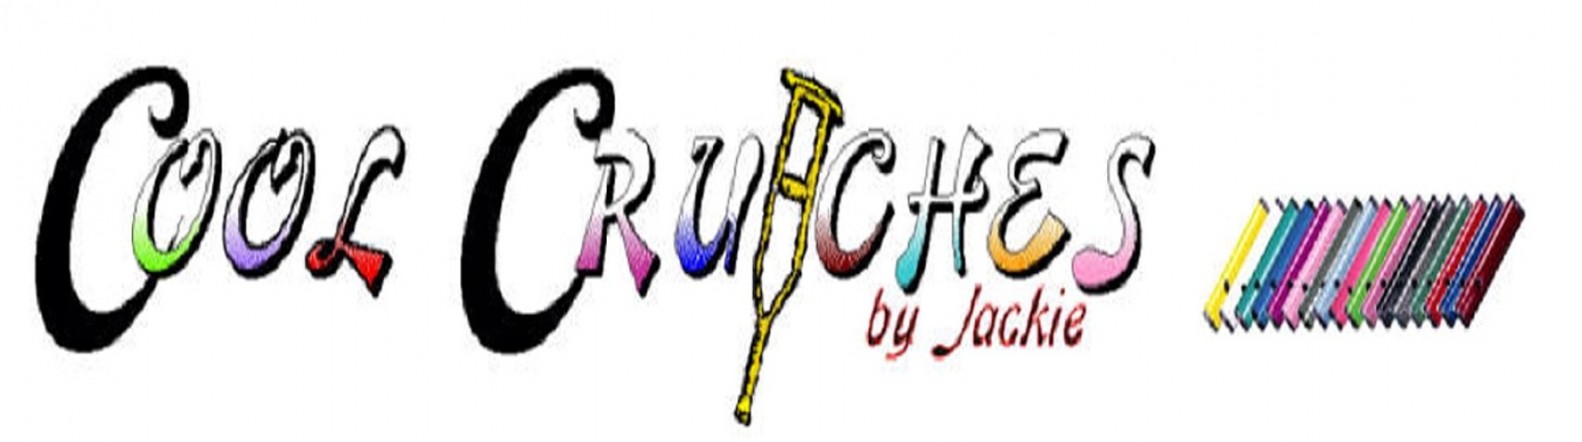 Cool Crutches by Jackie to introduce Crutcheze at the 24th annual ...